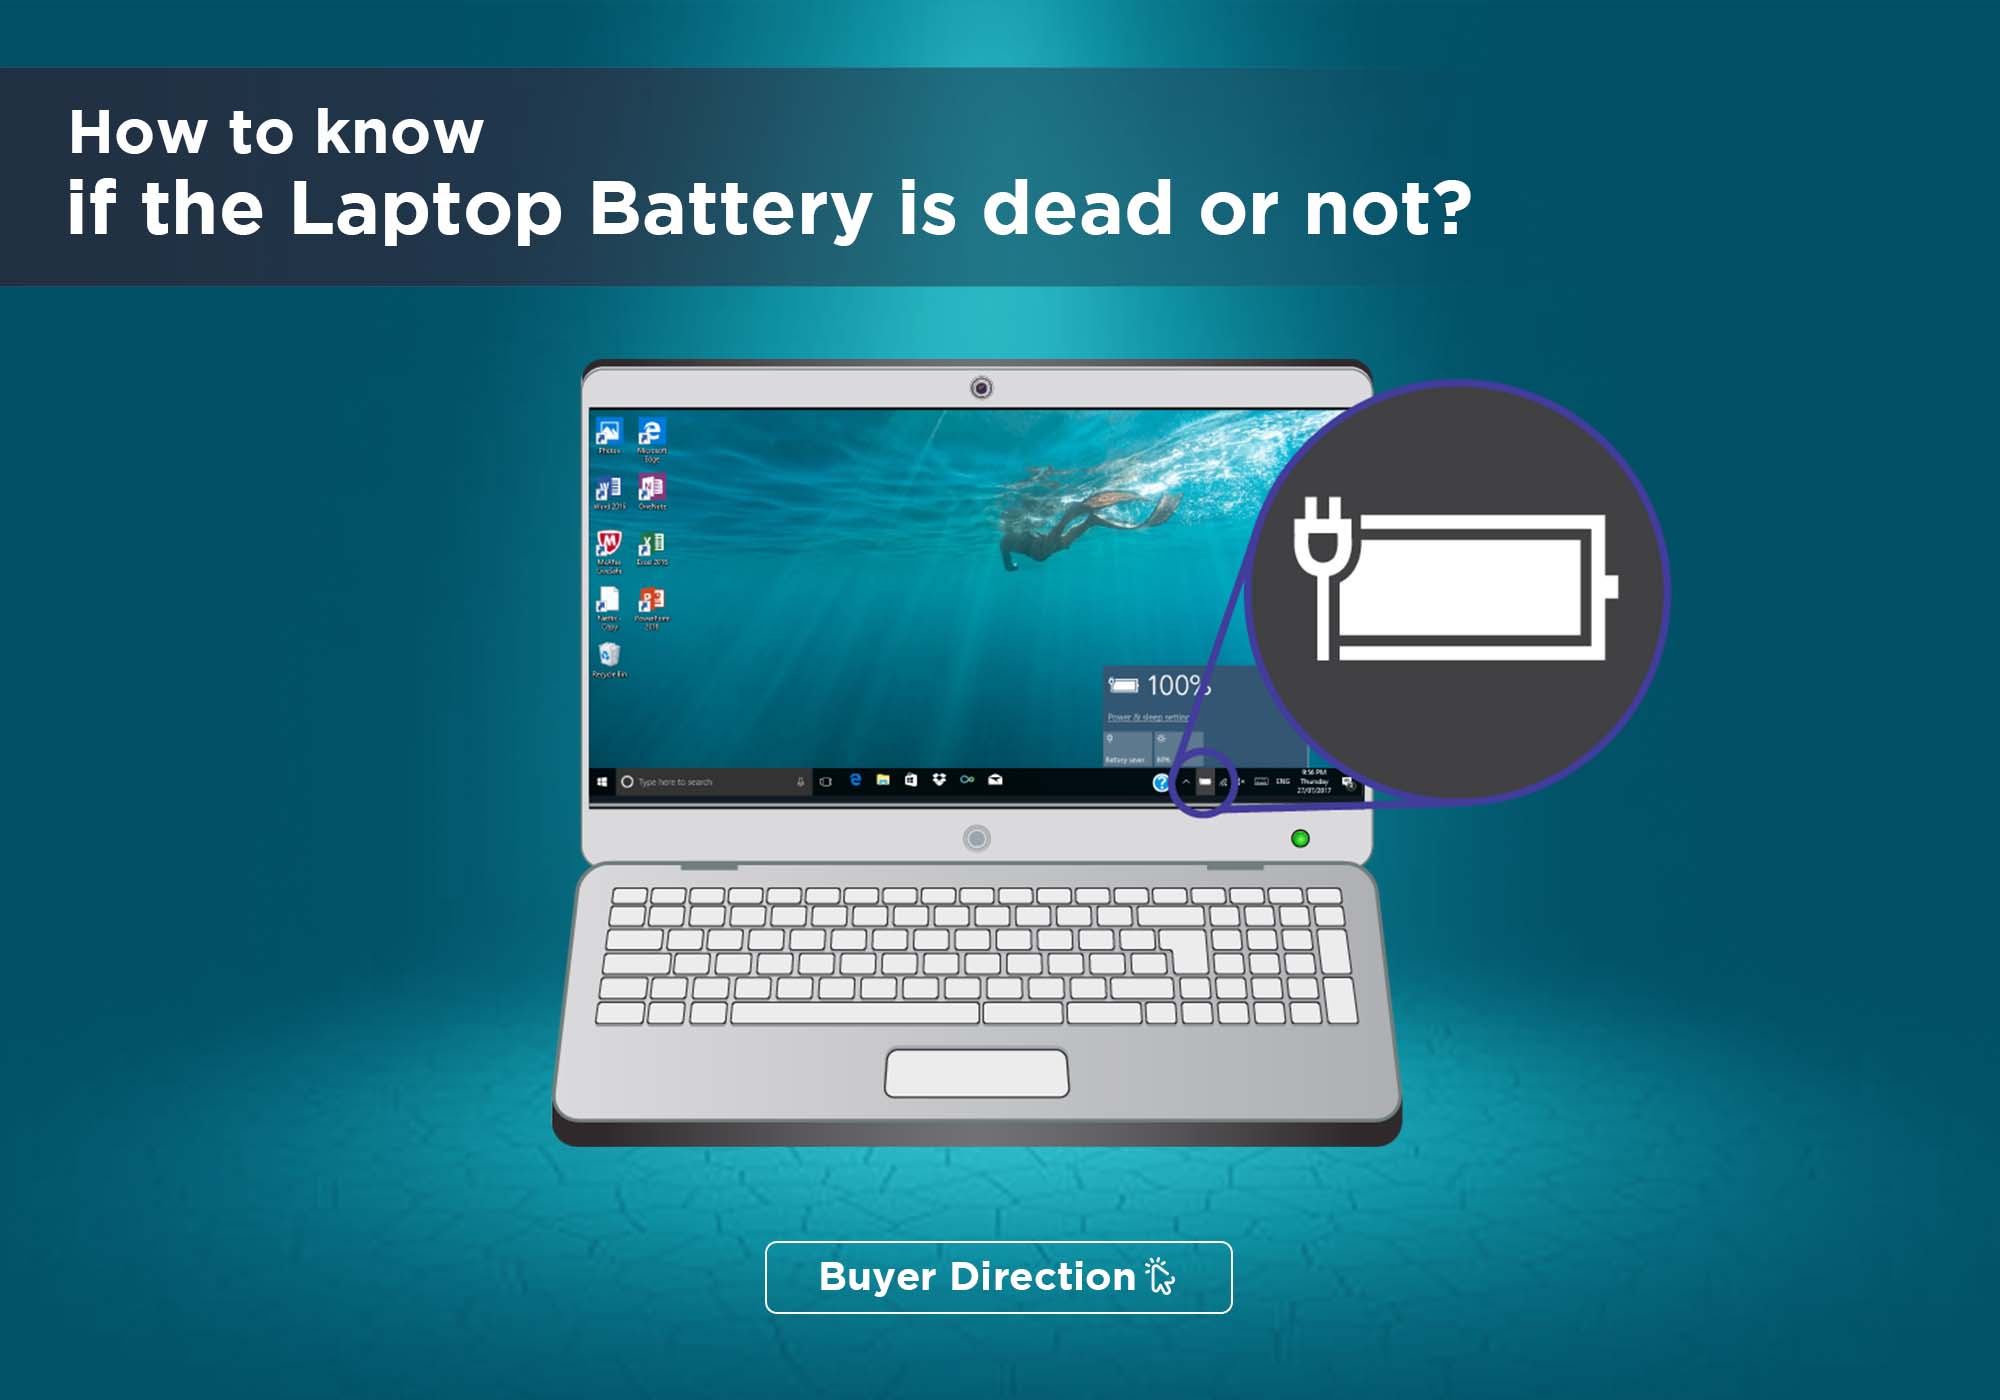 How to know if the Laptop Battery is dead or not?